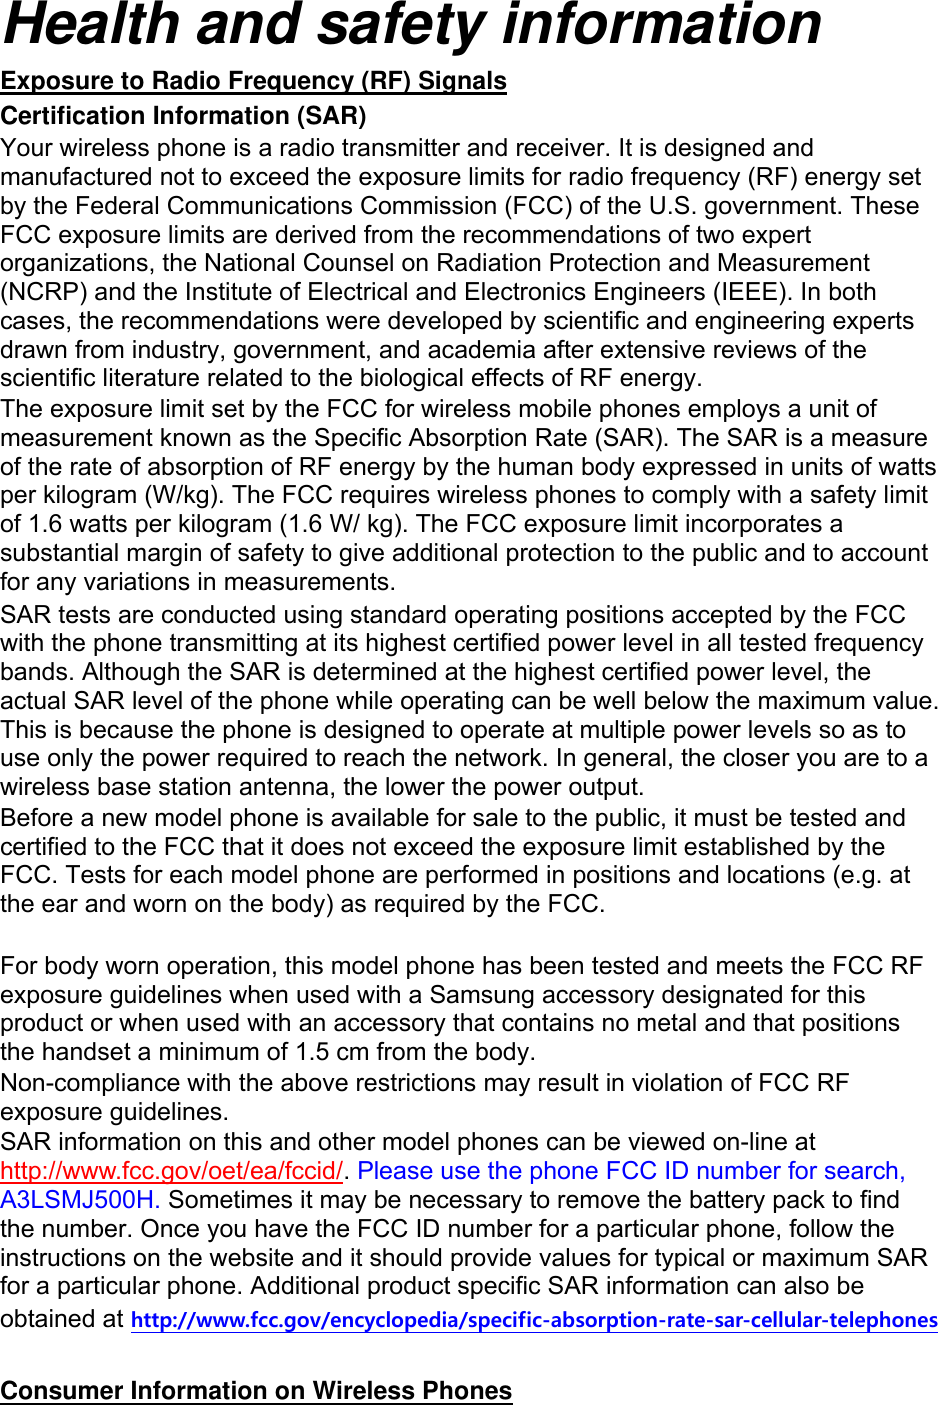 Health and safety information Exposure to Radio Frequency (RF) Signals Certification Information (SAR) Your wireless phone is a radio transmitter and receiver. It is designed and manufactured not to exceed the exposure limits for radio frequency (RF) energy set by the Federal Communications Commission (FCC) of the U.S. government. These FCC exposure limits are derived from the recommendations of two expert organizations, the National Counsel on Radiation Protection and Measurement (NCRP) and the Institute of Electrical and Electronics Engineers (IEEE). In both cases, the recommendations were developed by scientific and engineering experts drawn from industry, government, and academia after extensive reviews of the scientific literature related to the biological effects of RF energy. The exposure limit set by the FCC for wireless mobile phones employs a unit of measurement known as the Specific Absorption Rate (SAR). The SAR is a measure of the rate of absorption of RF energy by the human body expressed in units of watts per kilogram (W/kg). The FCC requires wireless phones to comply with a safety limit of 1.6 watts per kilogram (1.6 W/ kg). The FCC exposure limit incorporates a substantial margin of safety to give additional protection to the public and to account for any variations in measurements. SAR tests are conducted using standard operating positions accepted by the FCC with the phone transmitting at its highest certified power level in all tested frequency bands. Although the SAR is determined at the highest certified power level, the actual SAR level of the phone while operating can be well below the maximum value. This is because the phone is designed to operate at multiple power levels so as to use only the power required to reach the network. In general, the closer you are to a wireless base station antenna, the lower the power output. Before a new model phone is available for sale to the public, it must be tested and certified to the FCC that it does not exceed the exposure limit established by the FCC. Tests for each model phone are performed in positions and locations (e.g. at the ear and worn on the body) as required by the FCC.      For body worn operation, this model phone has been tested and meets the FCC RF exposure guidelines when used with a Samsung accessory designated for this product or when used with an accessory that contains no metal and that positions the handset a minimum of 1.5 cm from the body.   Non-compliance with the above restrictions may result in violation of FCC RF exposure guidelines. SAR information on this and other model phones can be viewed on-line at http://www.fcc.gov/oet/ea/fccid/. Please use the phone FCC ID number for search, A3LSMJ500H. Sometimes it may be necessary to remove the battery pack to find the number. Once you have the FCC ID number for a particular phone, follow the instructions on the website and it should provide values for typical or maximum SAR for a particular phone. Additional product specific SAR information can also be obtained at http://www.fcc.gov/encyclopedia/specific-absorption-rate-sar-cellular-telephones  Consumer Information on Wireless Phones 